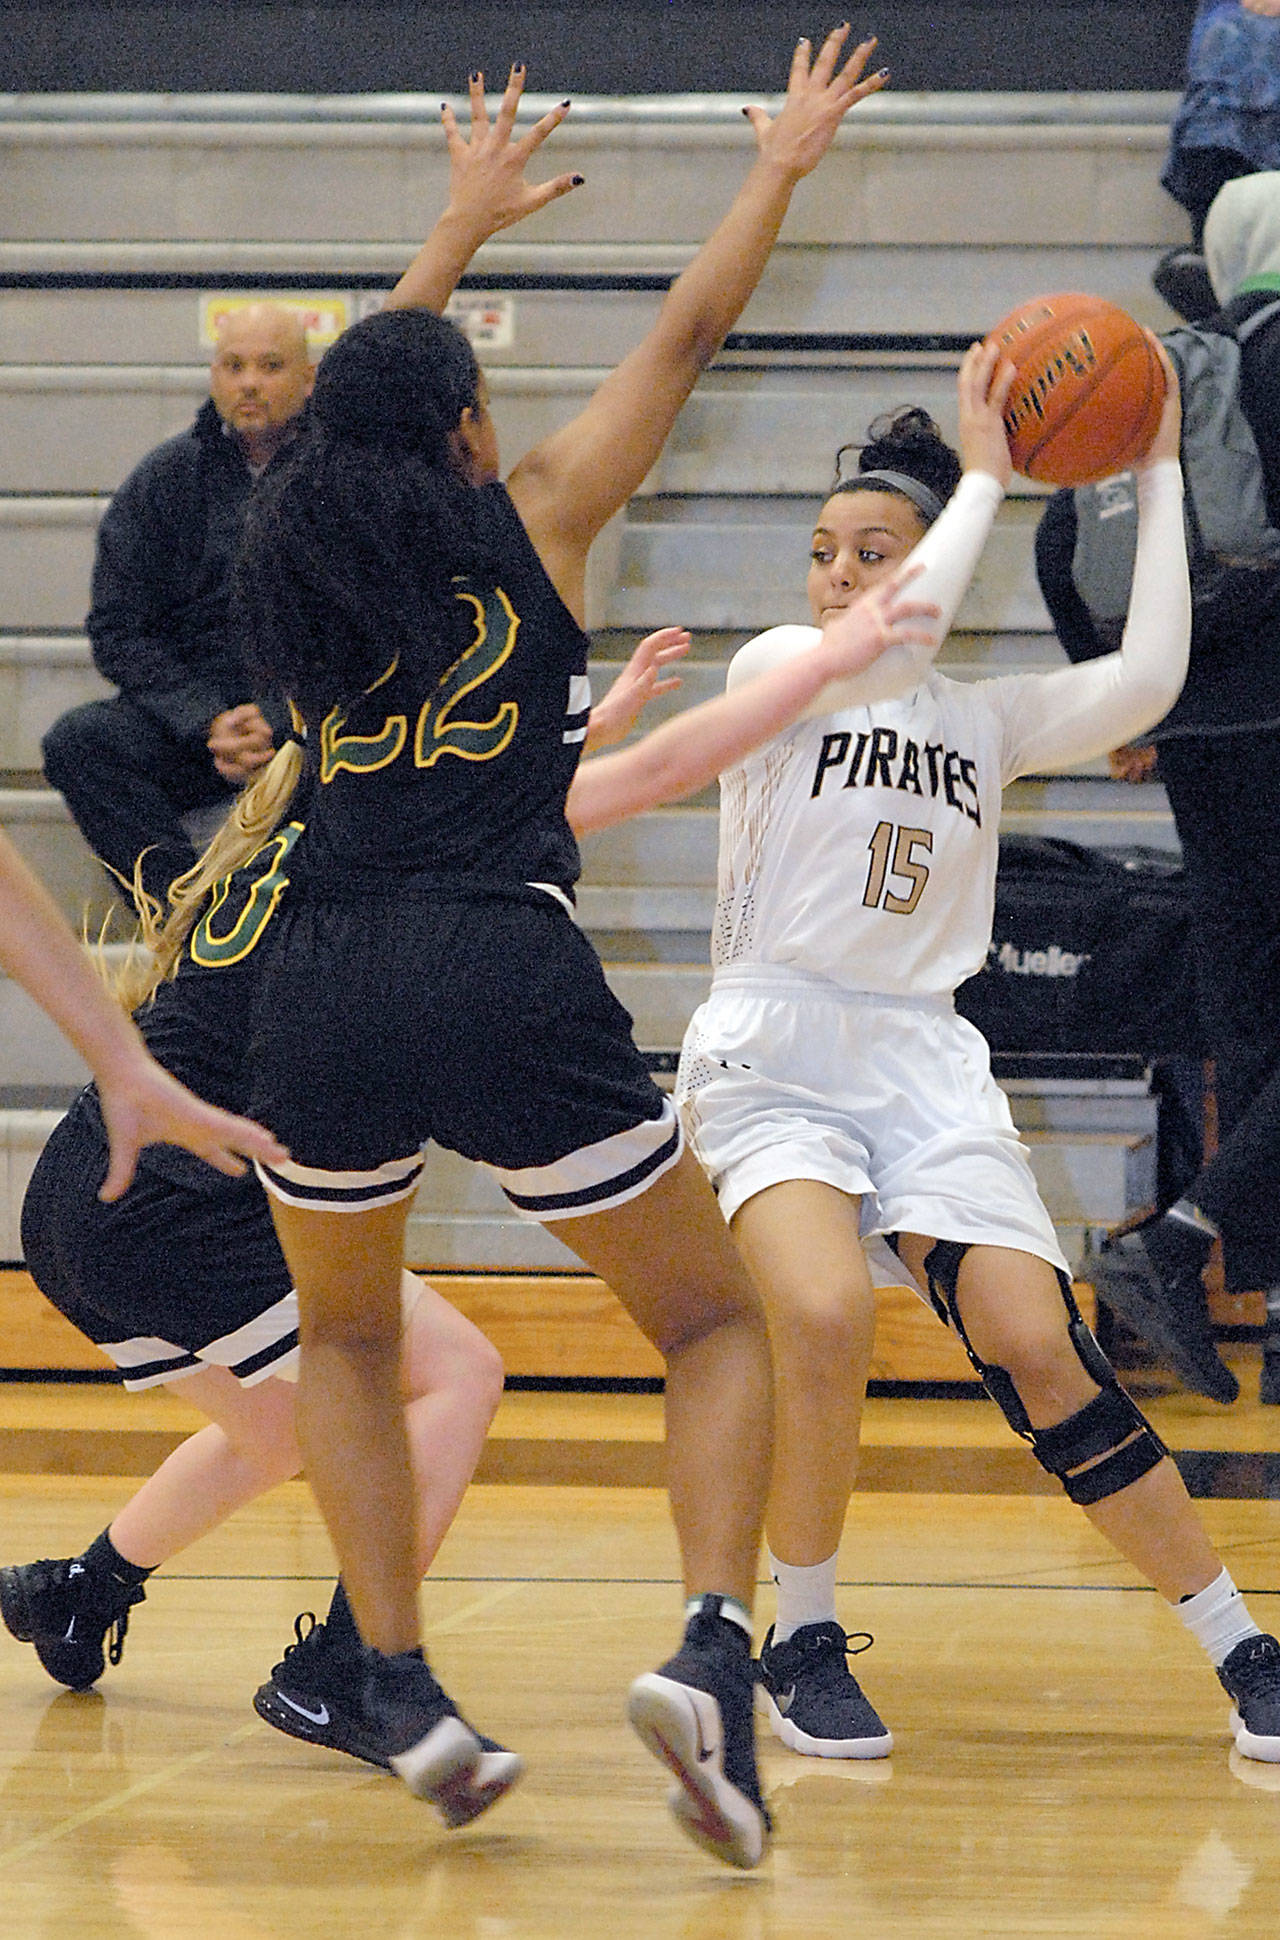 Keith Thorpe/Peninsula Daily News Peninsula’s Casandra White, right, looks for a way around the defense of Shoreline’s Raelyn Kimmel, left, and Clara Hansen in the third quarter on Wednesday in Port Angeles.